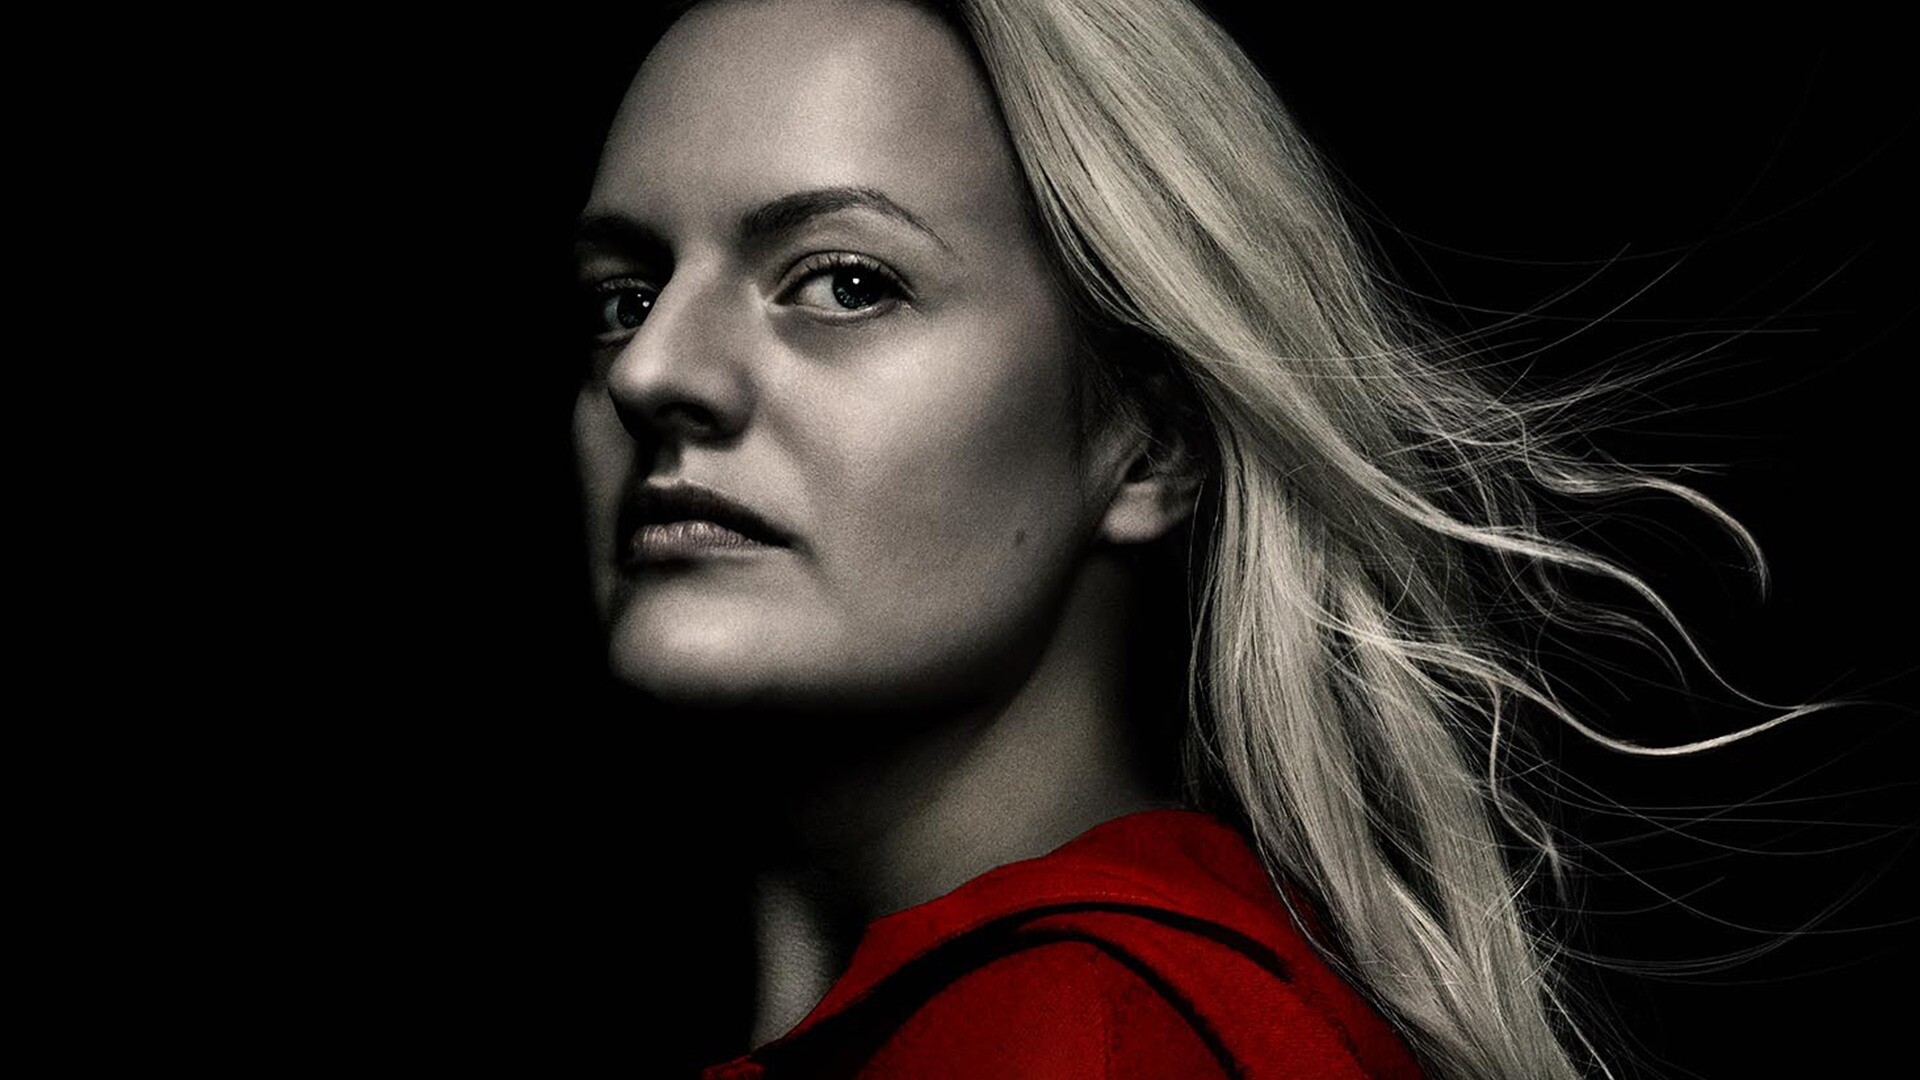 The Handmaid's Tale: Elisabeth Singleton Moss, Known for her work in several television dramas, Two Primetime Emmy Awards. 1920x1080 Full HD Background.